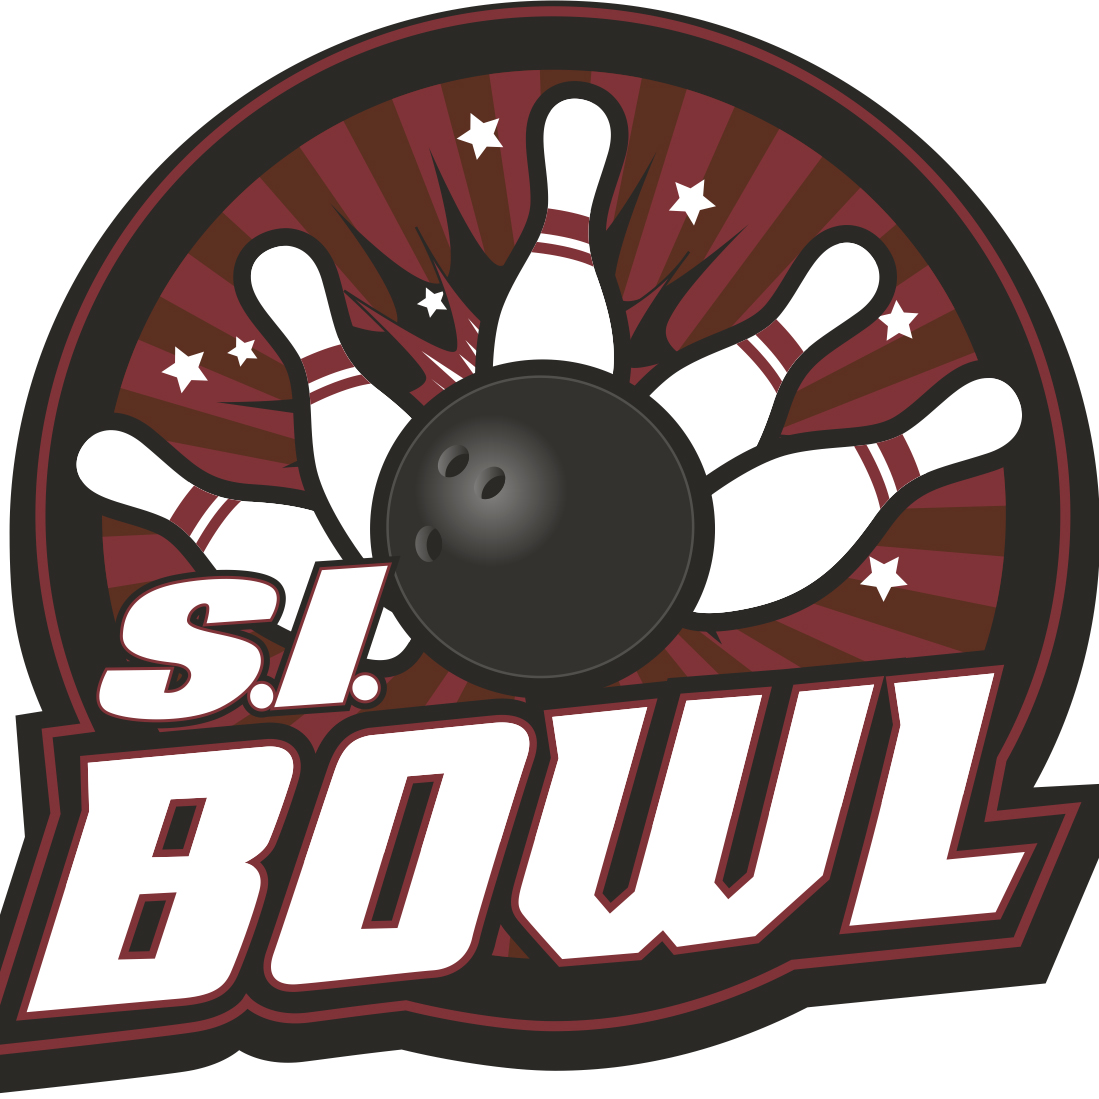 $30.00 S.I. Bowl Bowling Certificate